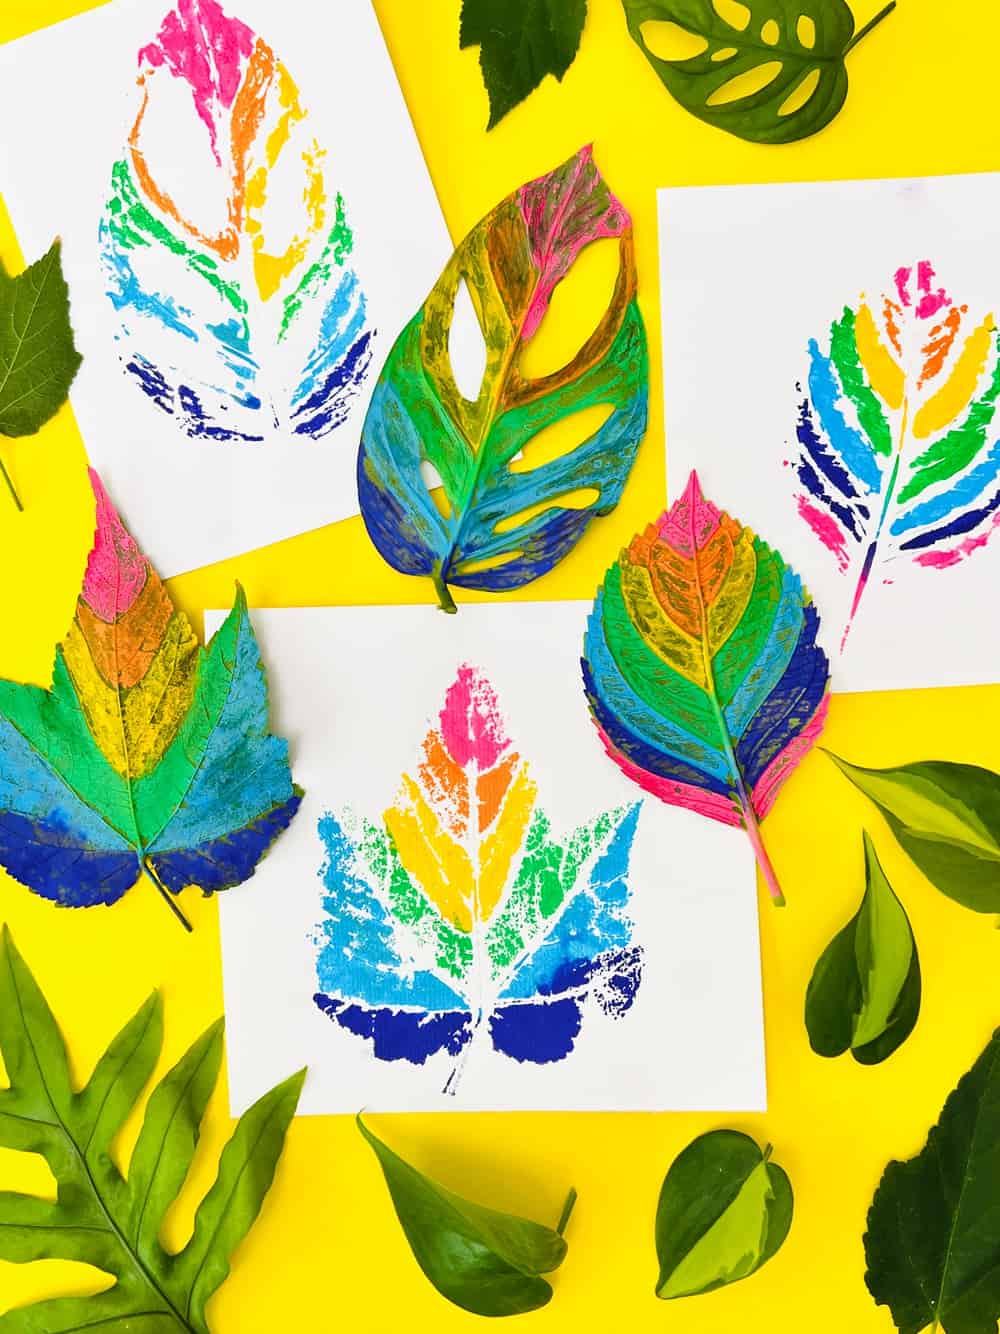 Painted Leaf Art - How to Paint Leaves